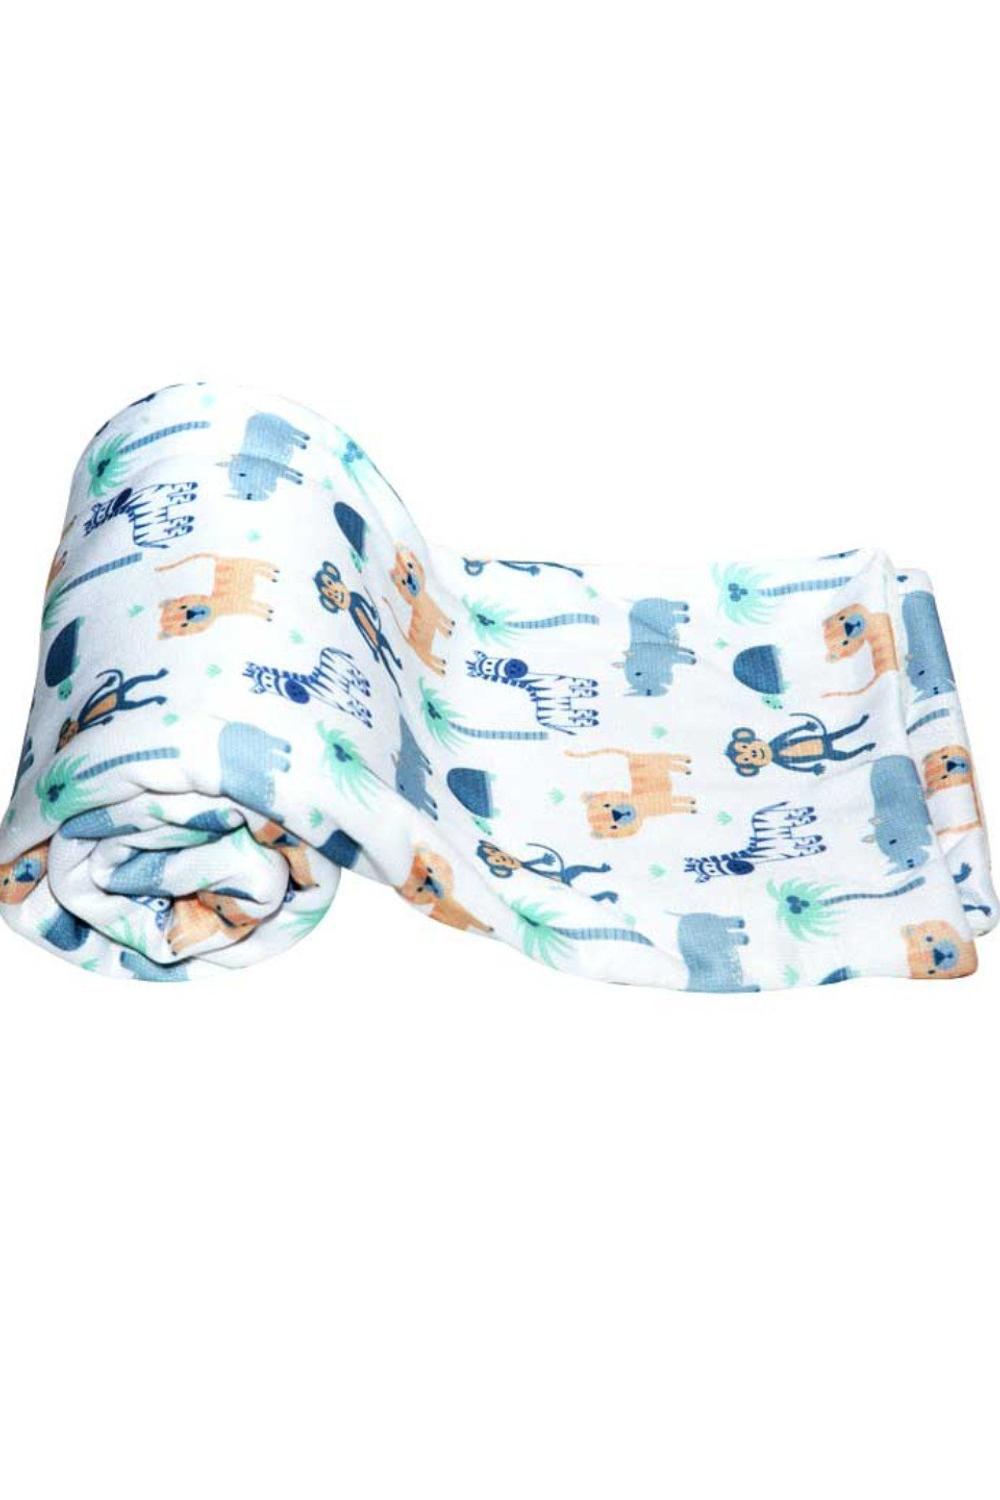 Mee Mee Soft Double Layer Reversible 
Baby Blanket (Blue)